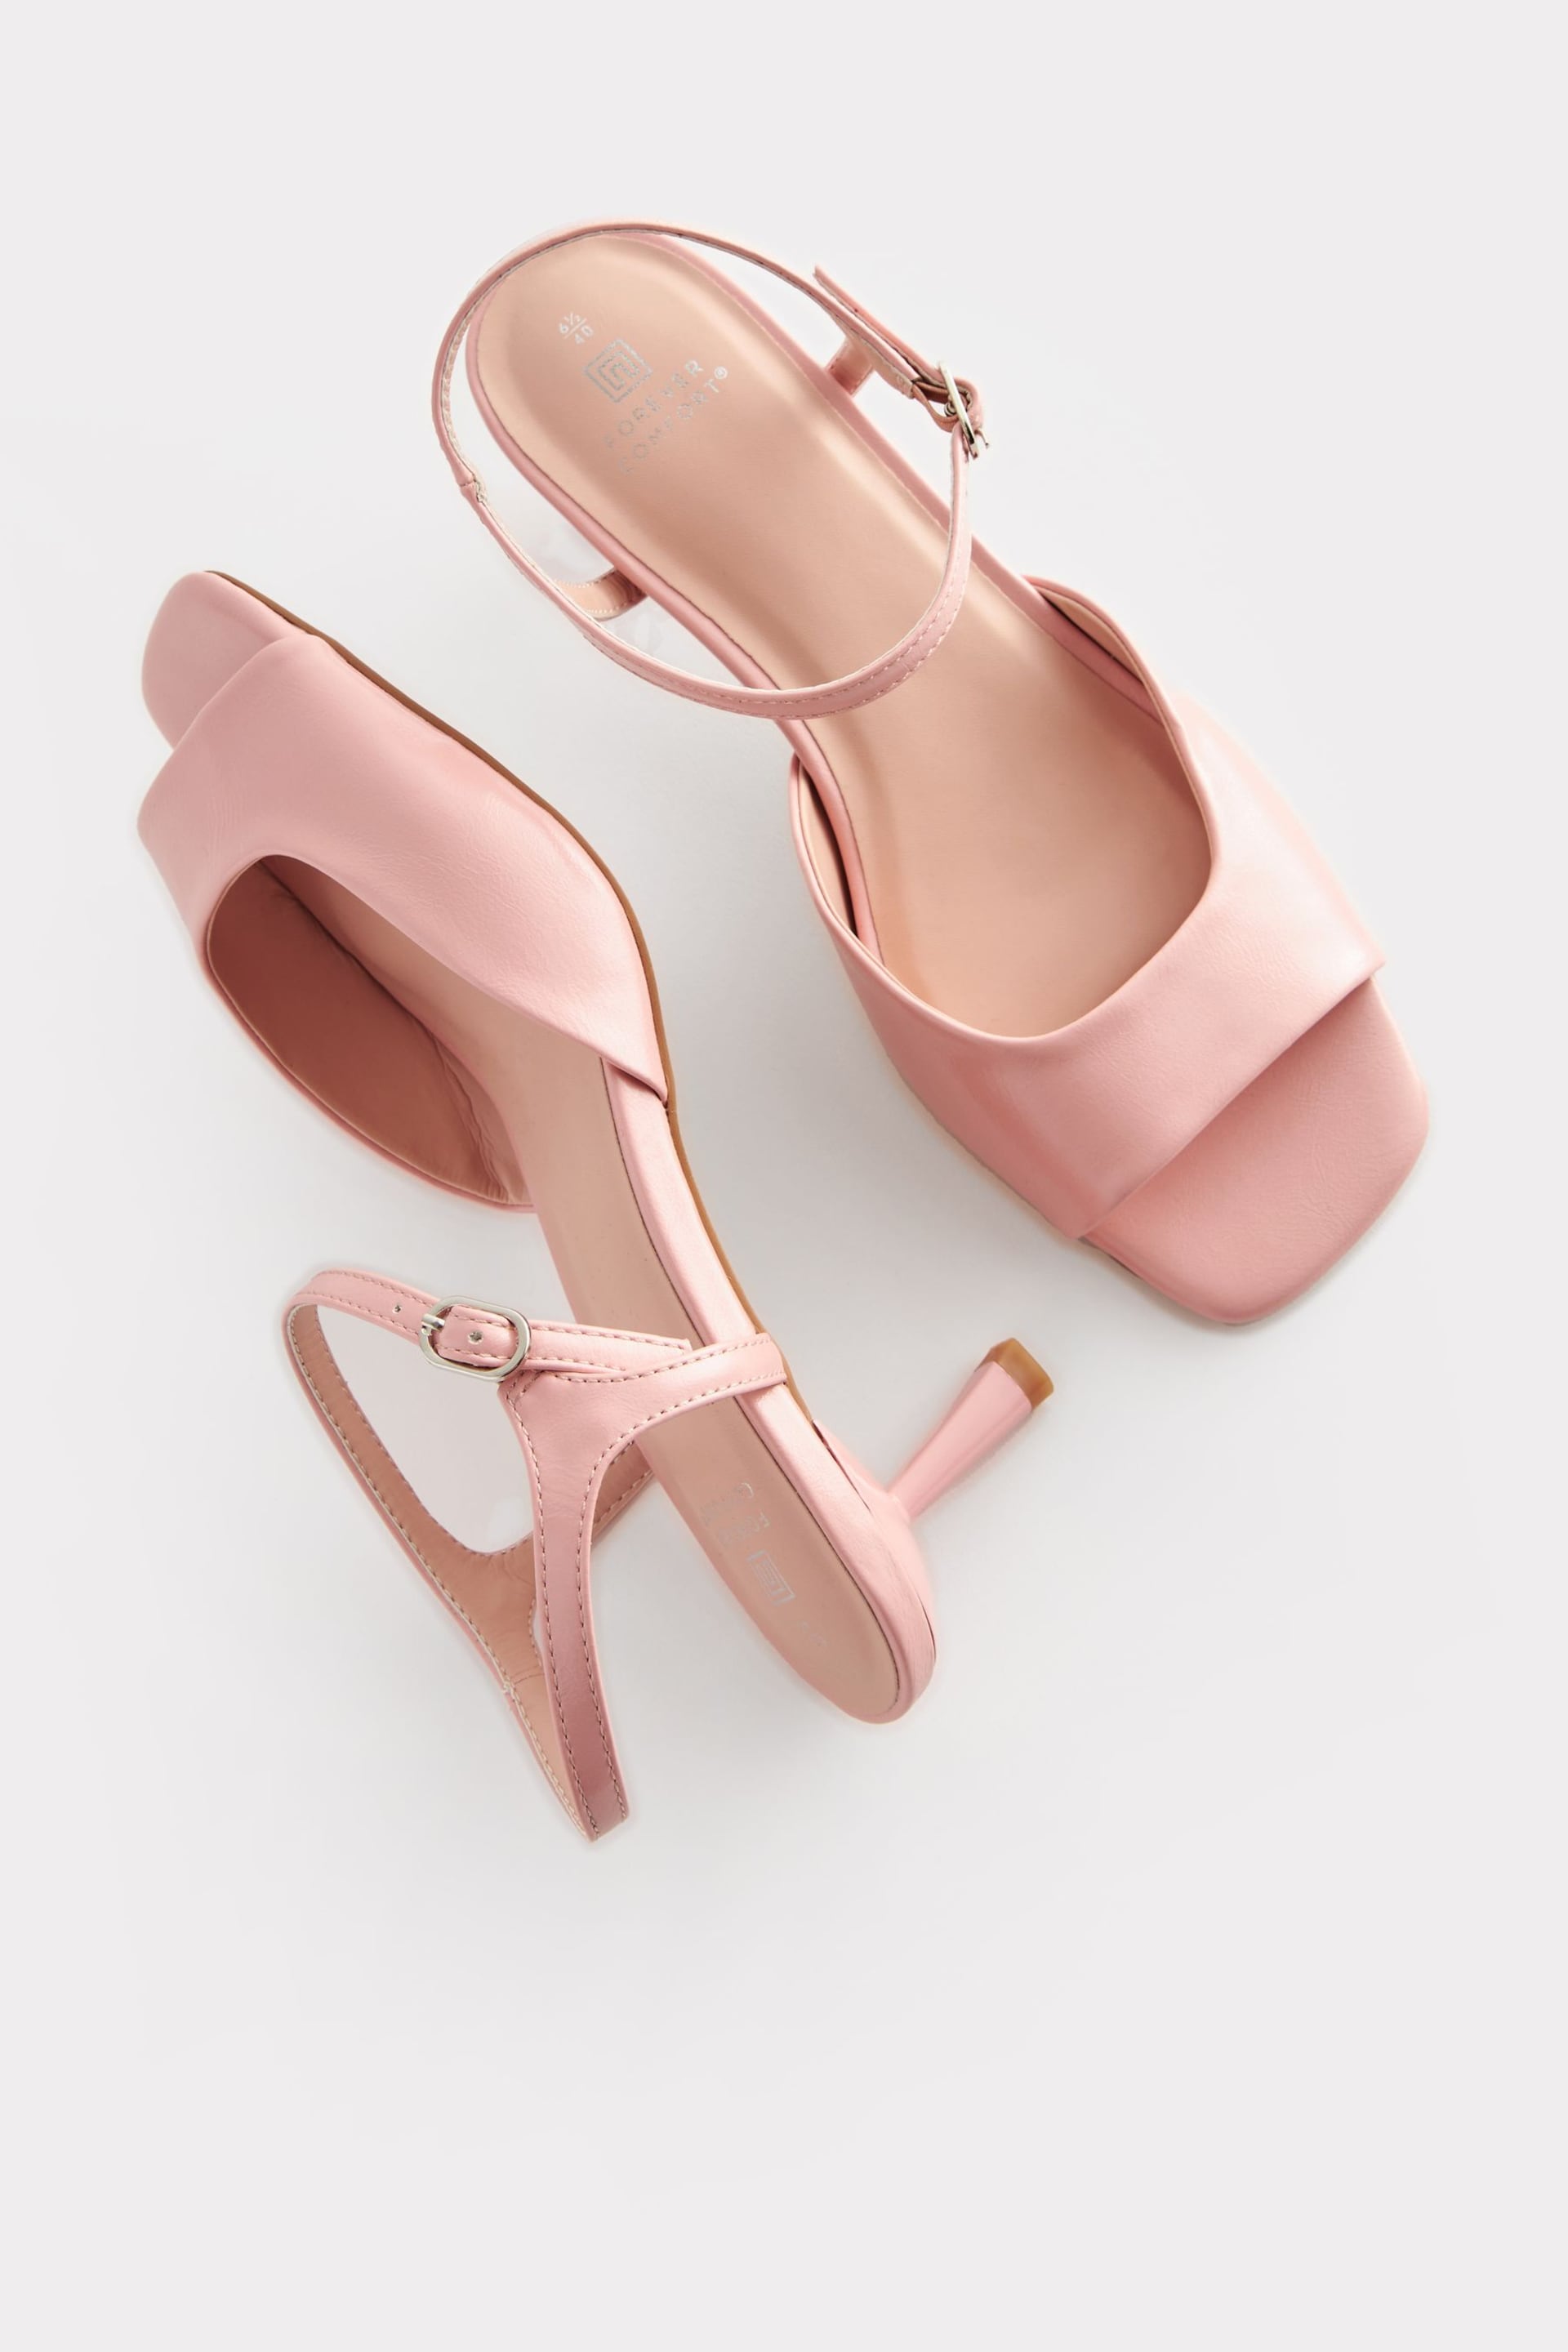 Nude Forever Comfort® Low Simple Sandals - Image 5 of 6